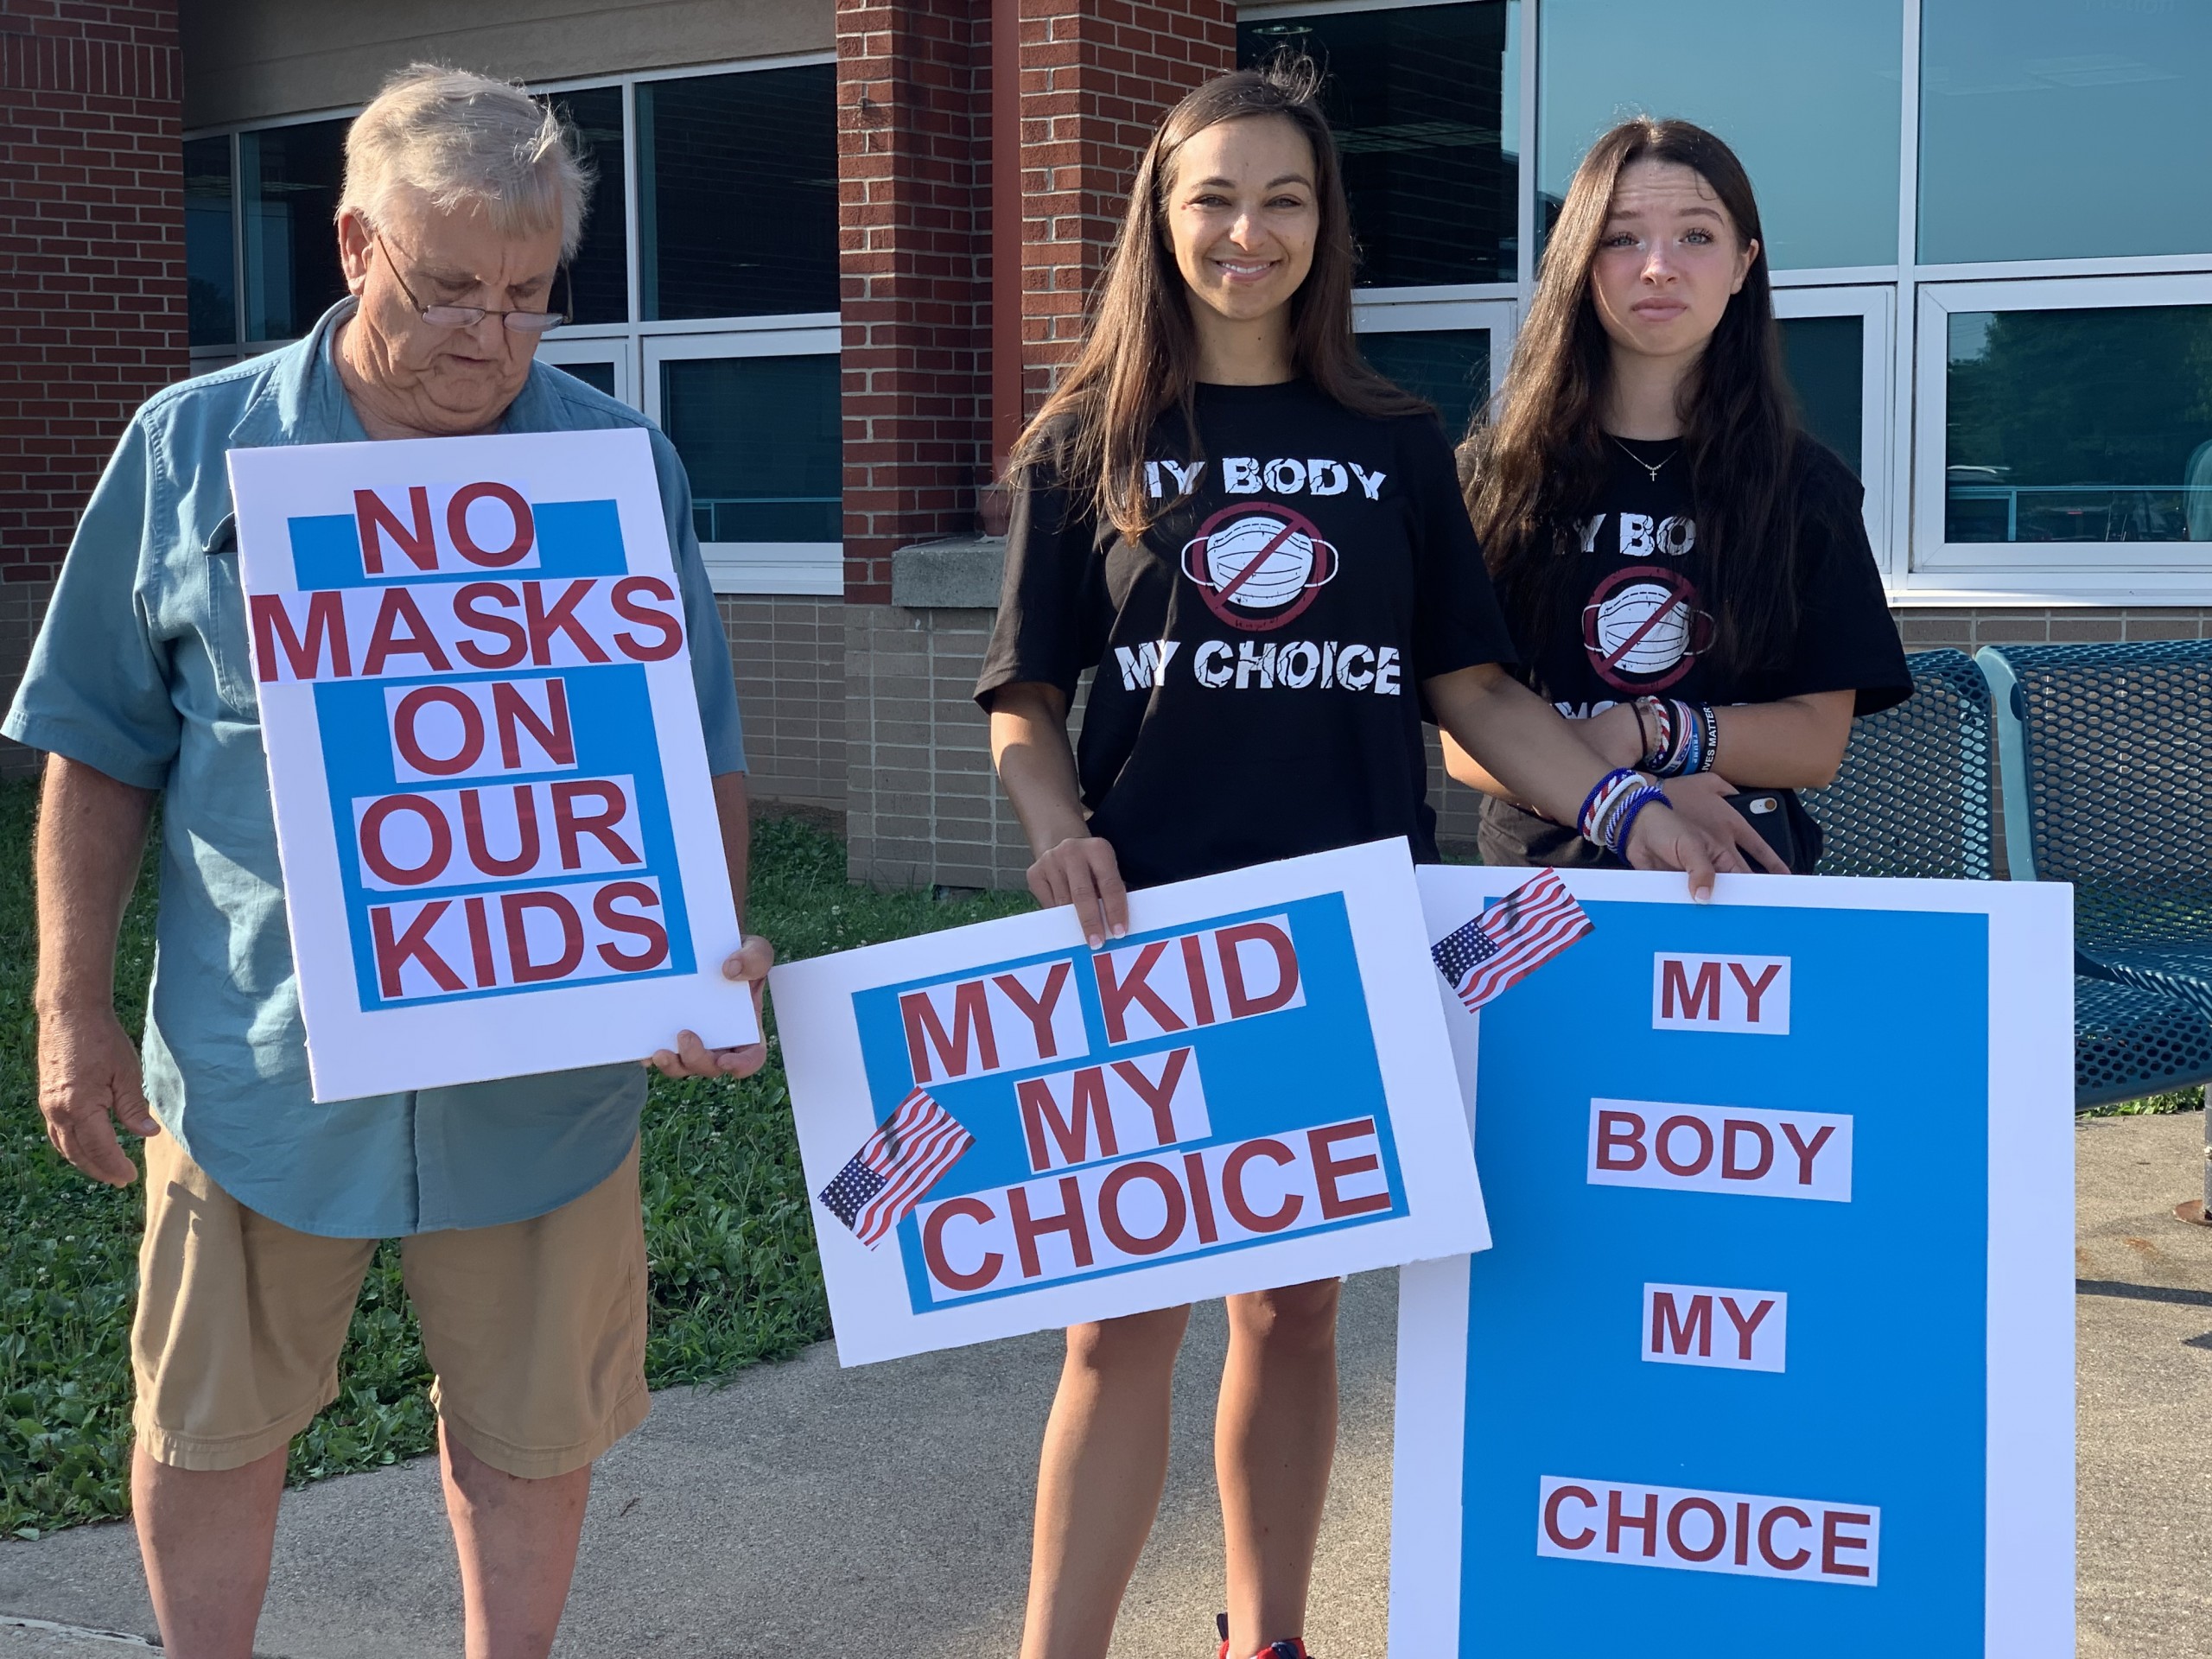 Small Group Gathers To Protest Mask Requirement In Jessamine County Schools - Abc 36 News